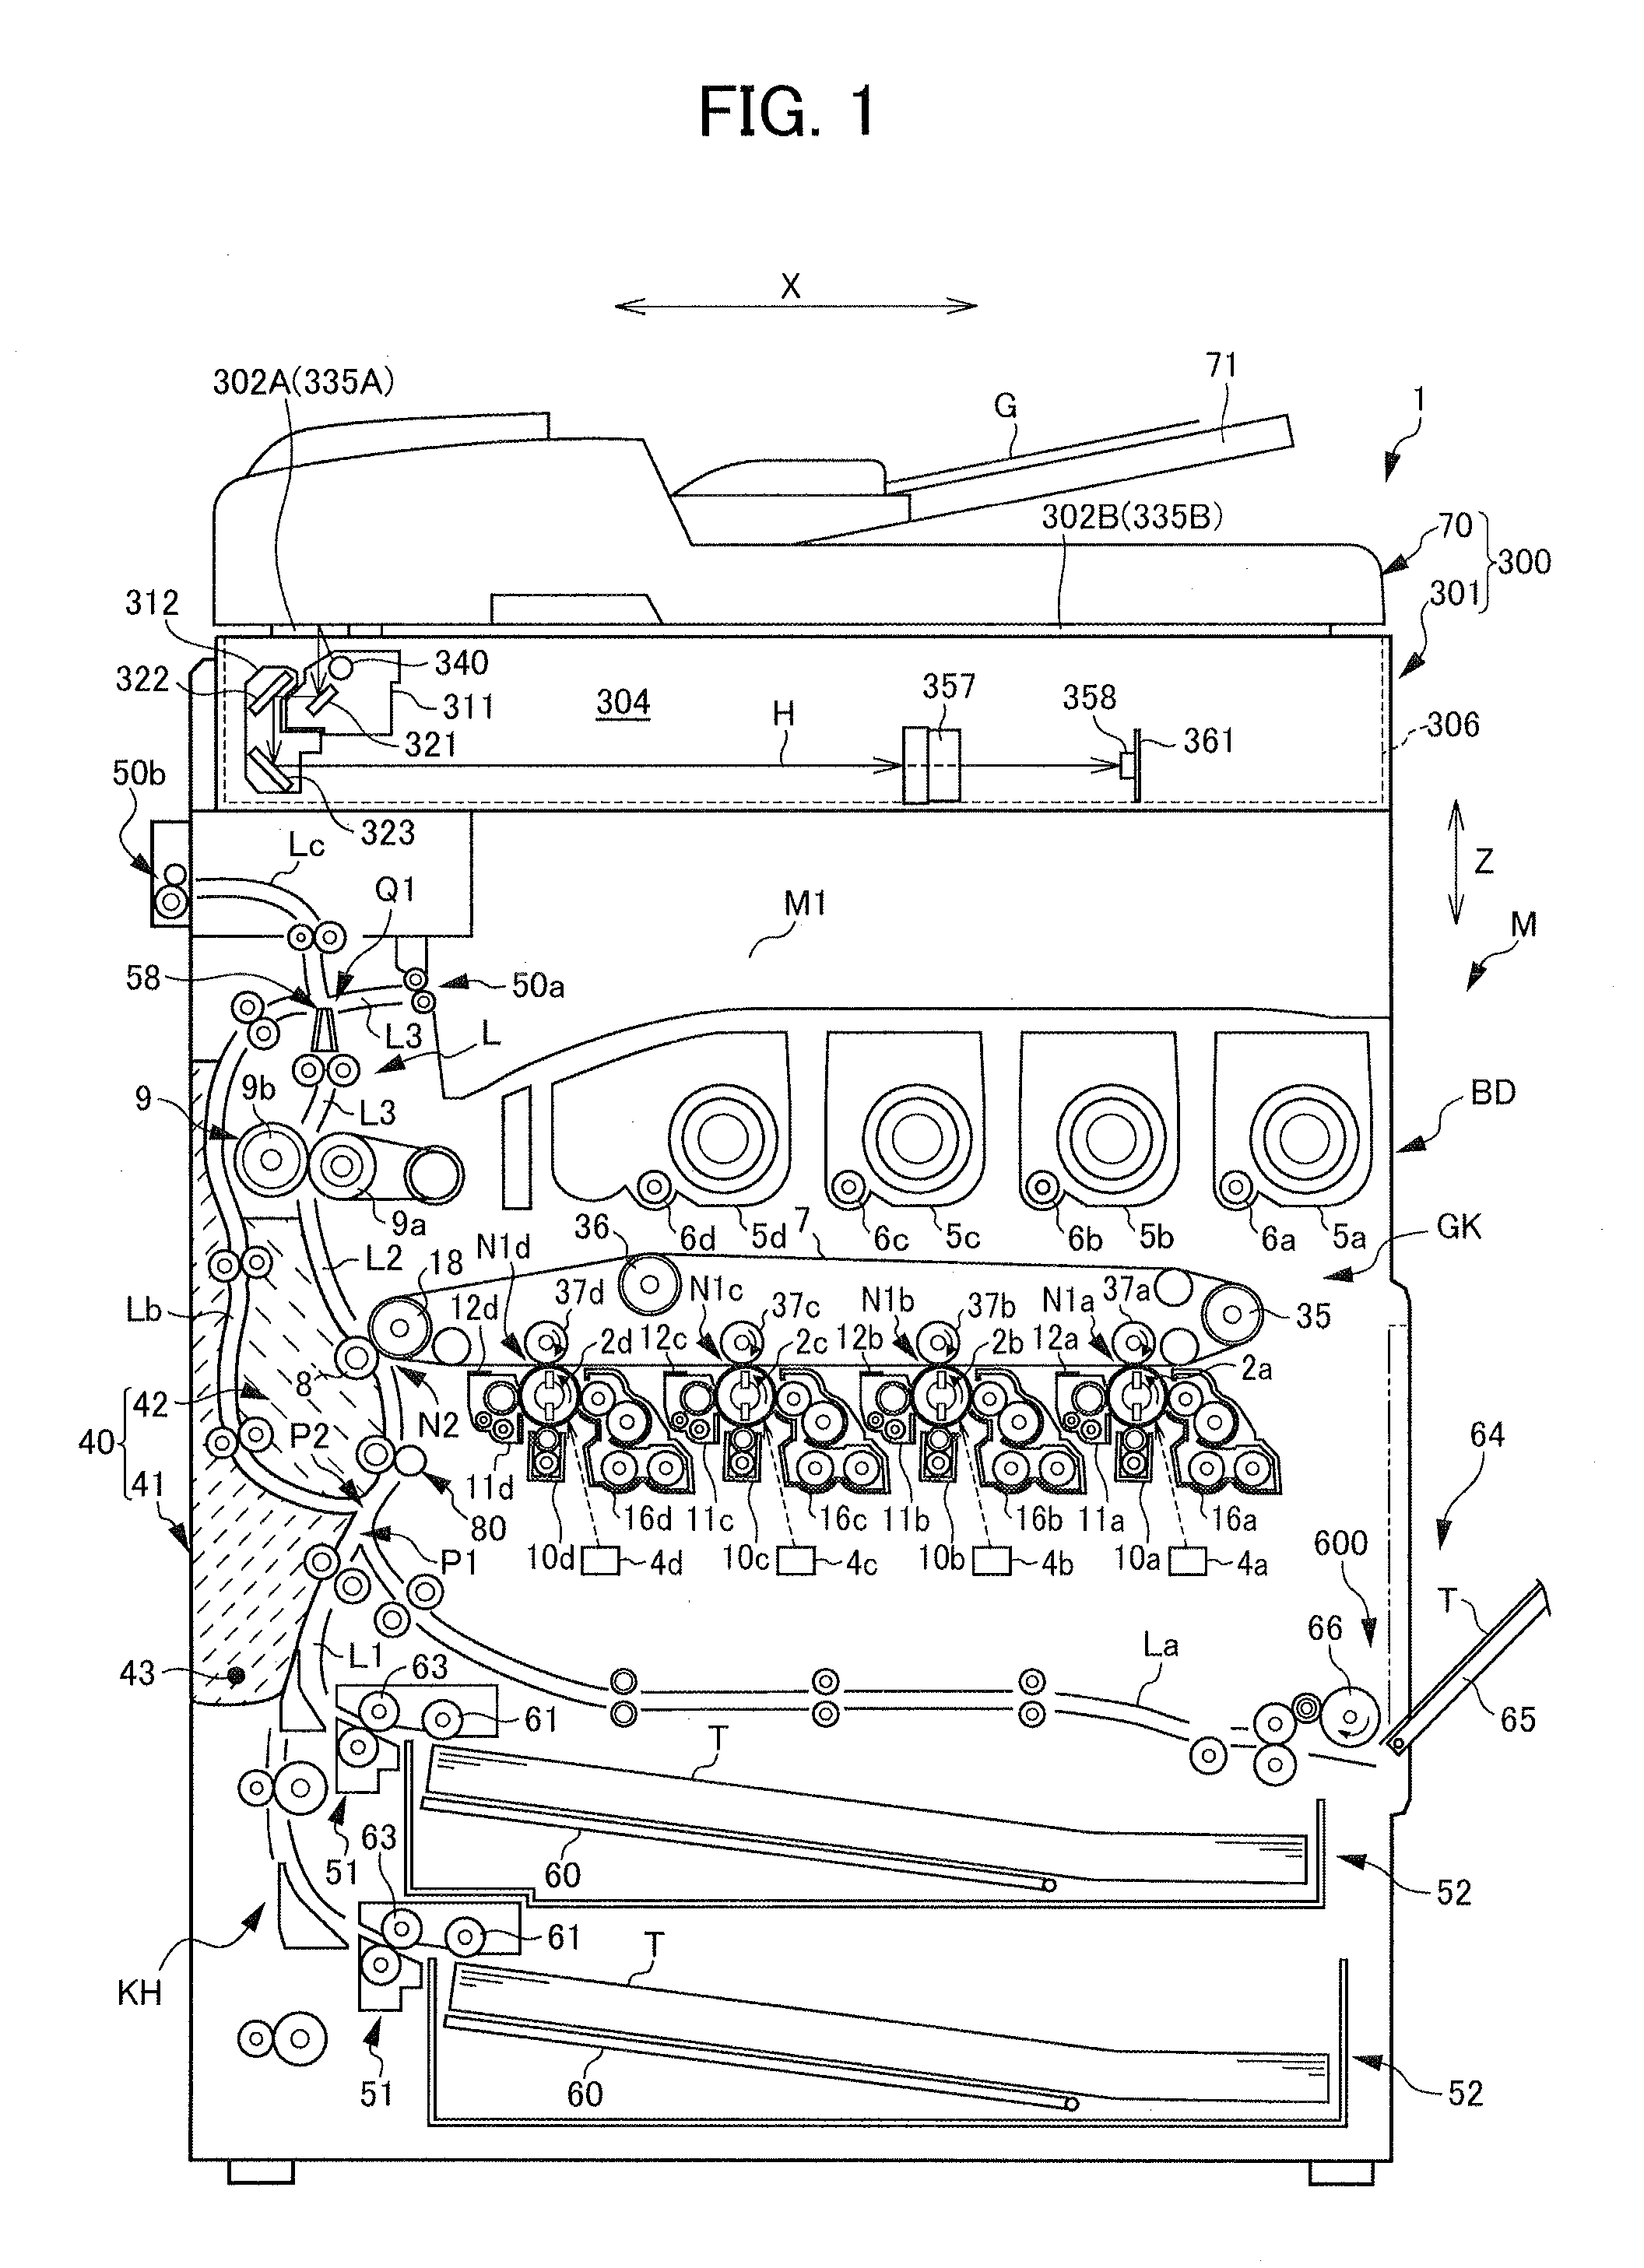 Image forming apparatus and feed mechanism